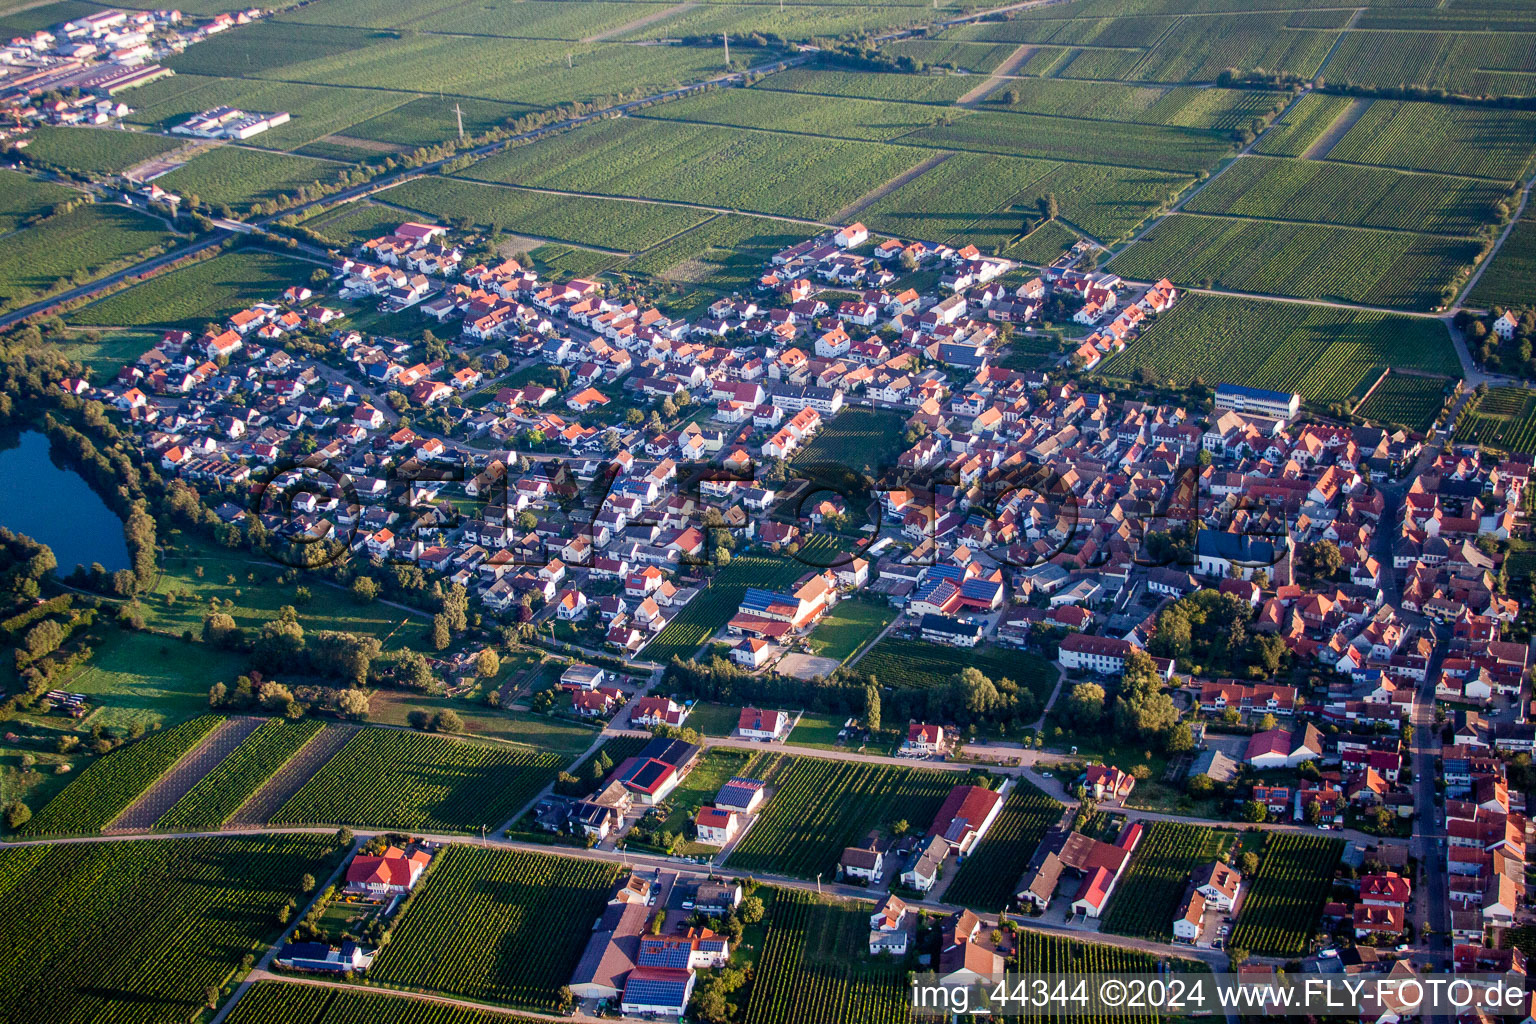 Village - view on the edge of agricultural fields and farmland in Kirrweiler (Pfalz) in the state Rhineland-Palatinate, Germany seen from above